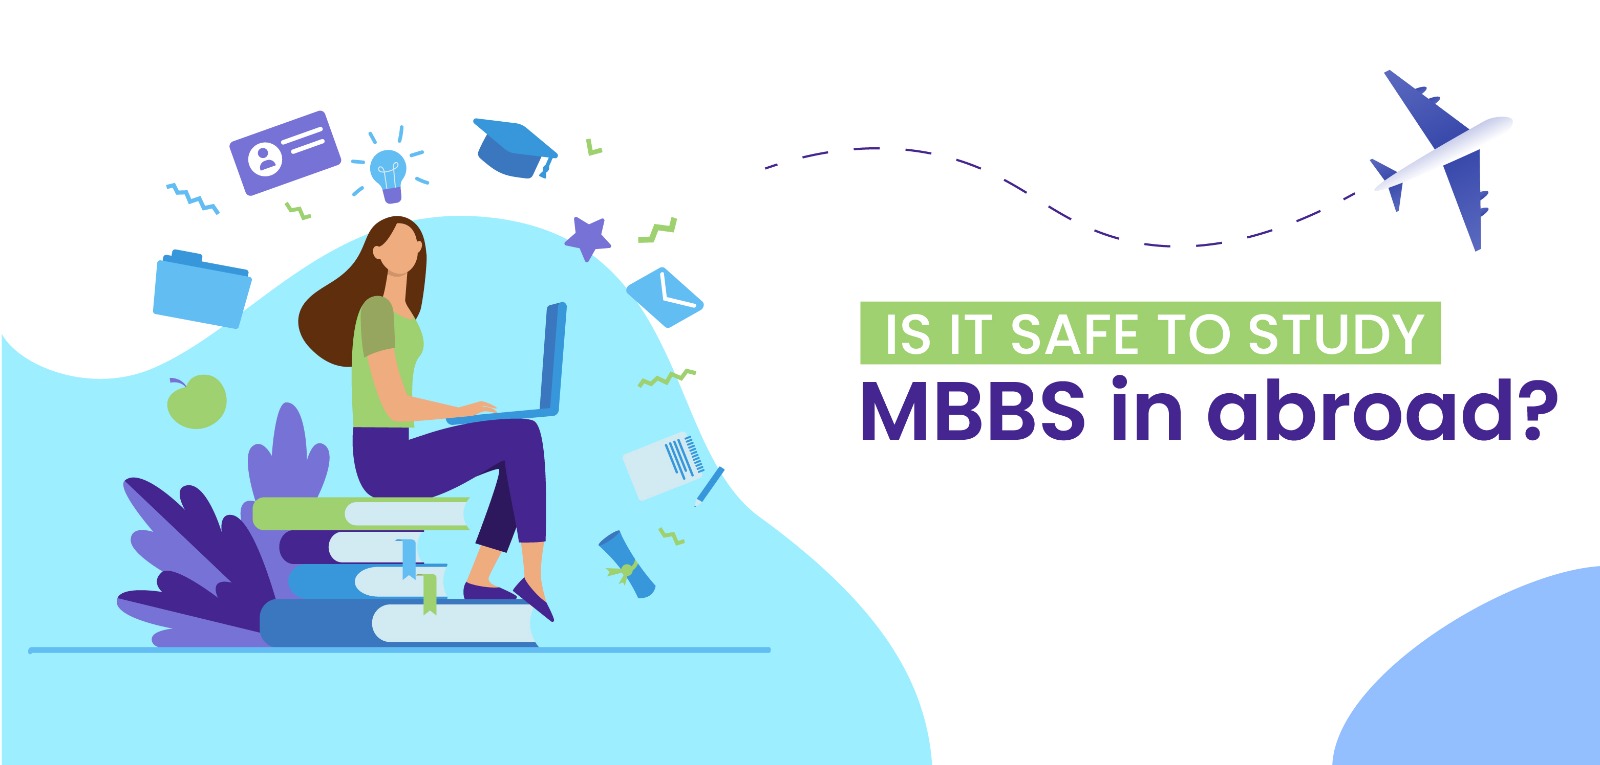 Is it safe to study MBBS in abroad? 